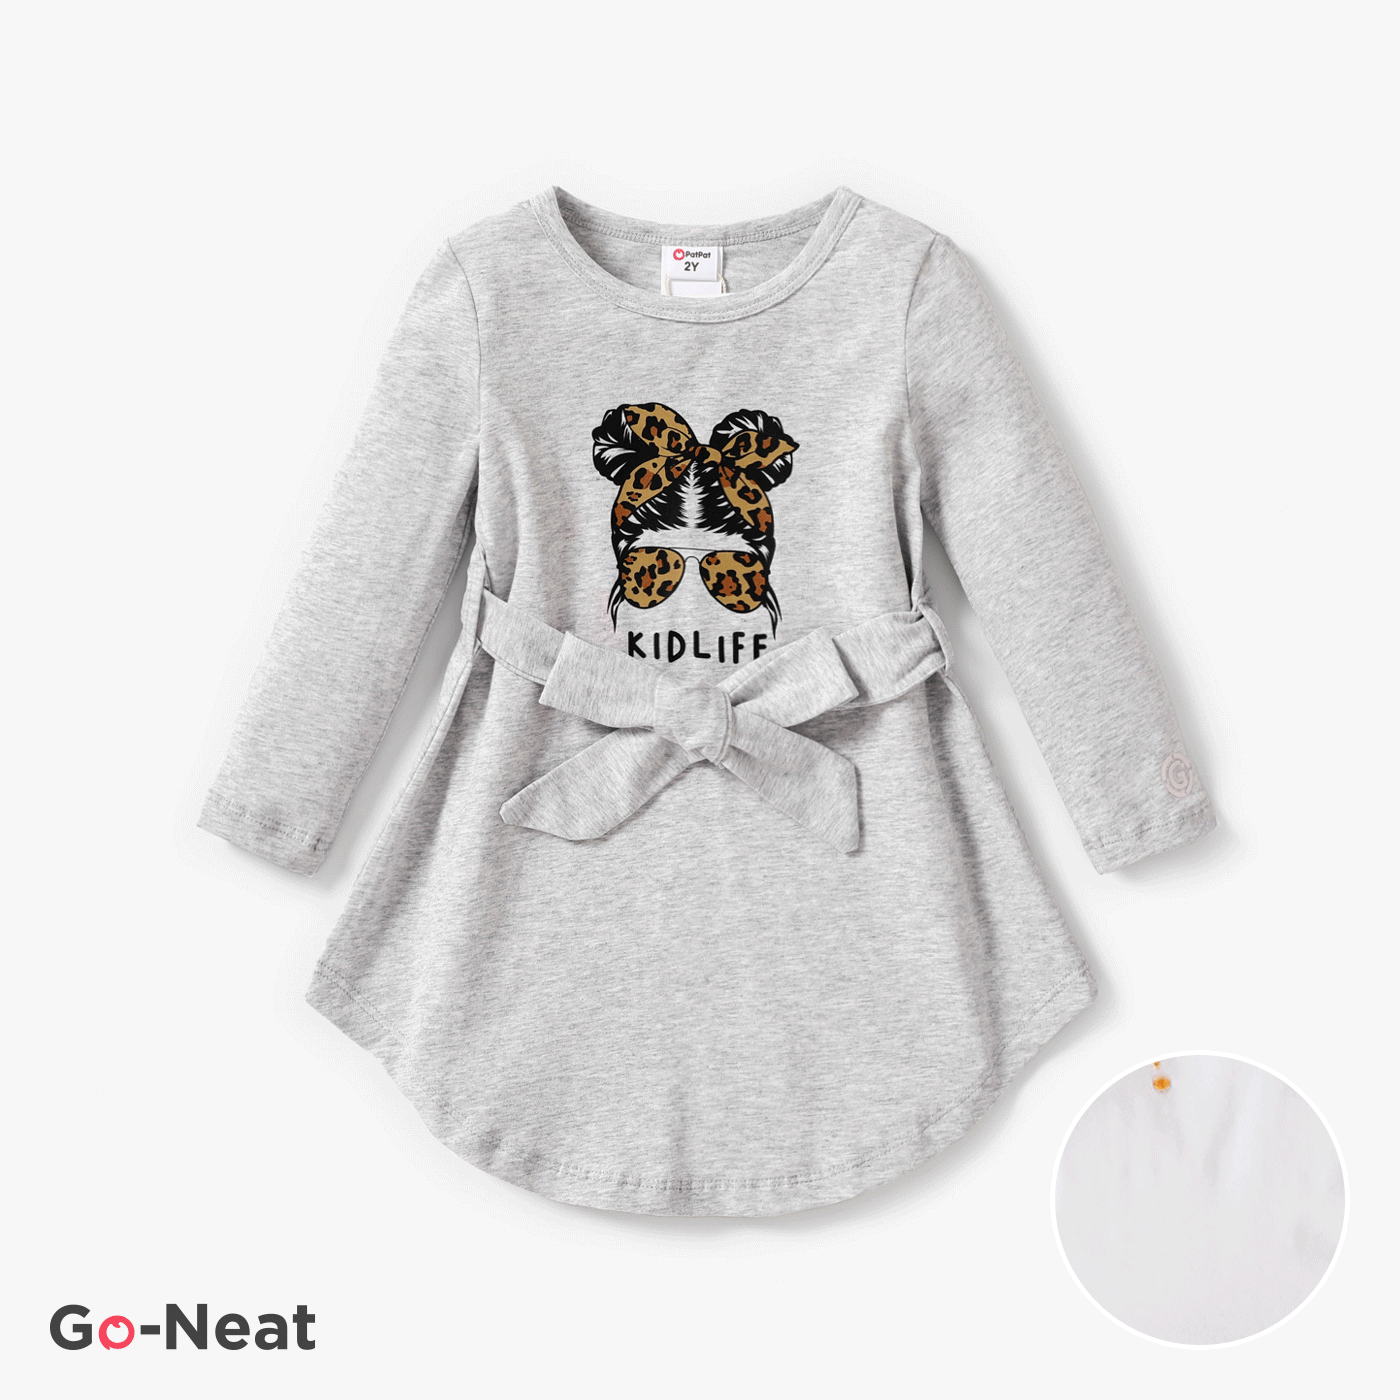 Go-Neat Water Repellent And Stain Resistant Baby/Toddler Girl Solid Color Romper/Dress